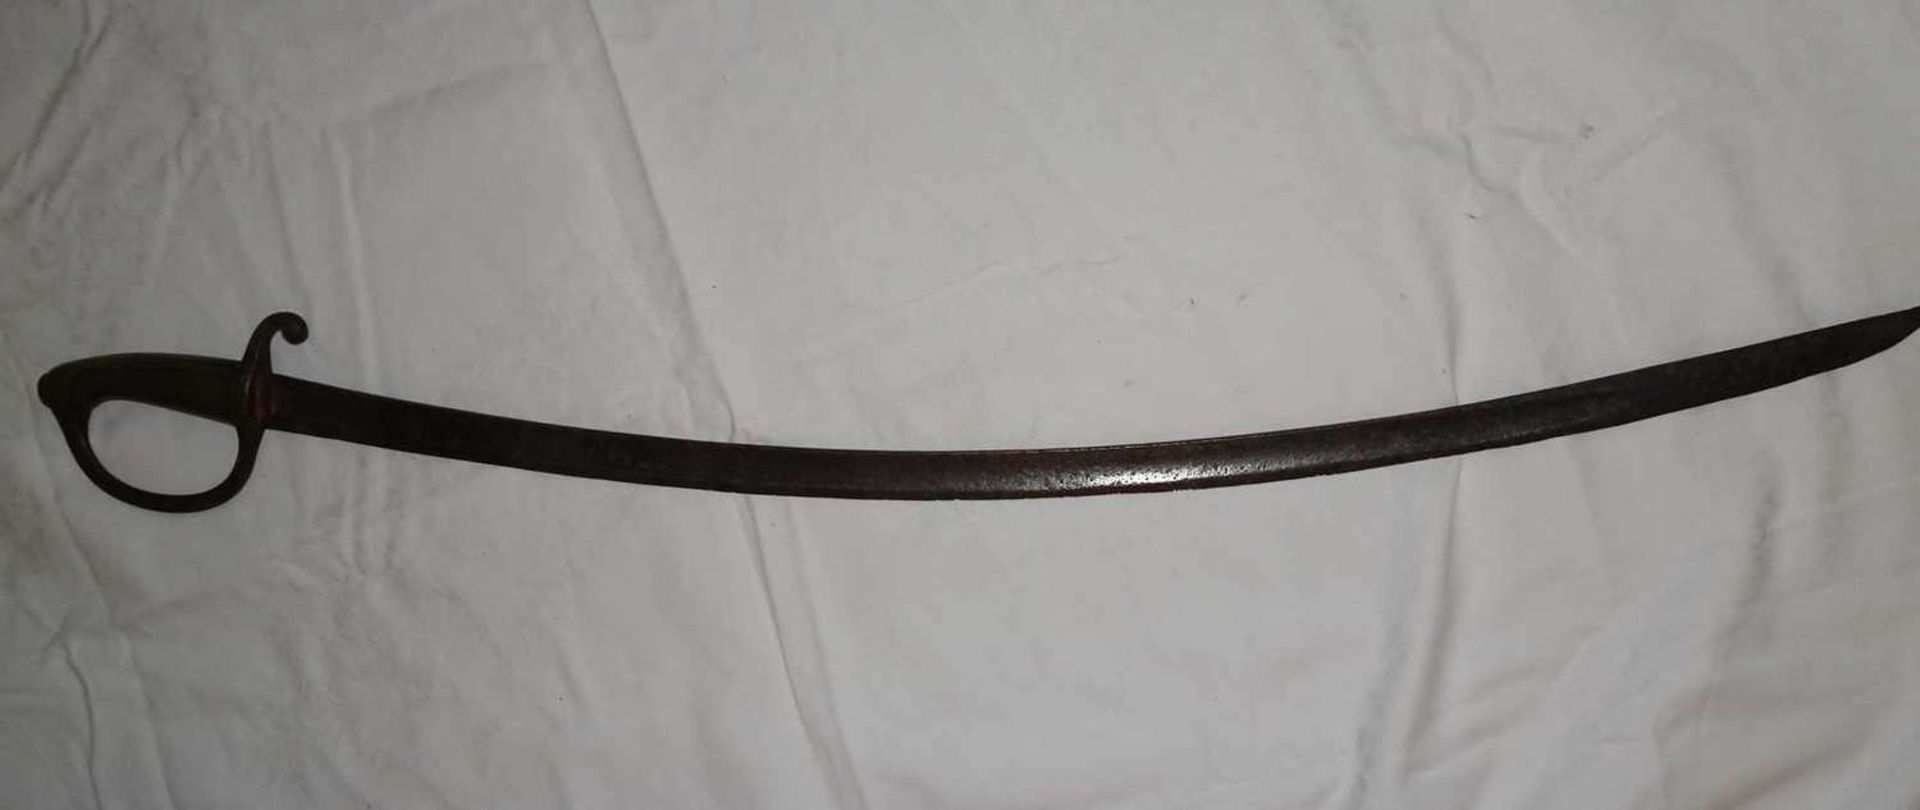 Scimitar, blade with rust, probably Prussia. Overall length approx. 92 cmKrummsäbel, Klinge mit